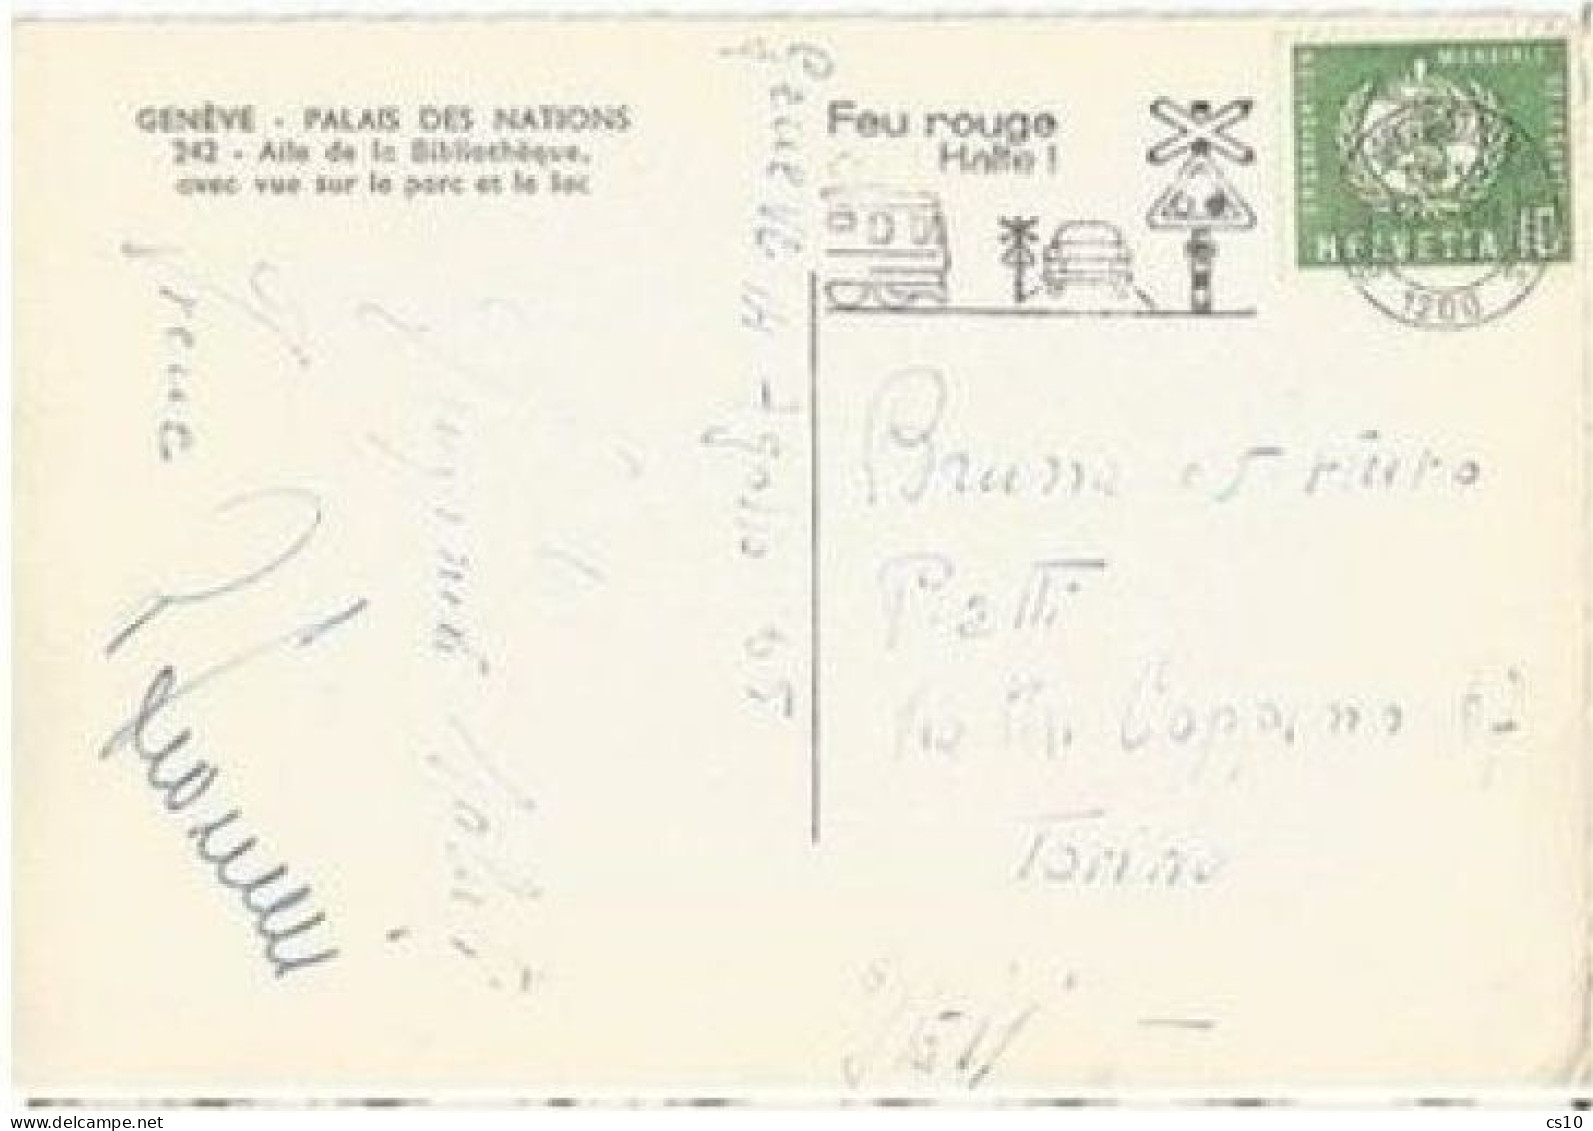 Suisse Service OMS-WHO Nations Unies C.10 Solo Franking Pcard Geneve 13aug1965 Official Cachet X Italy - Lettres & Documents